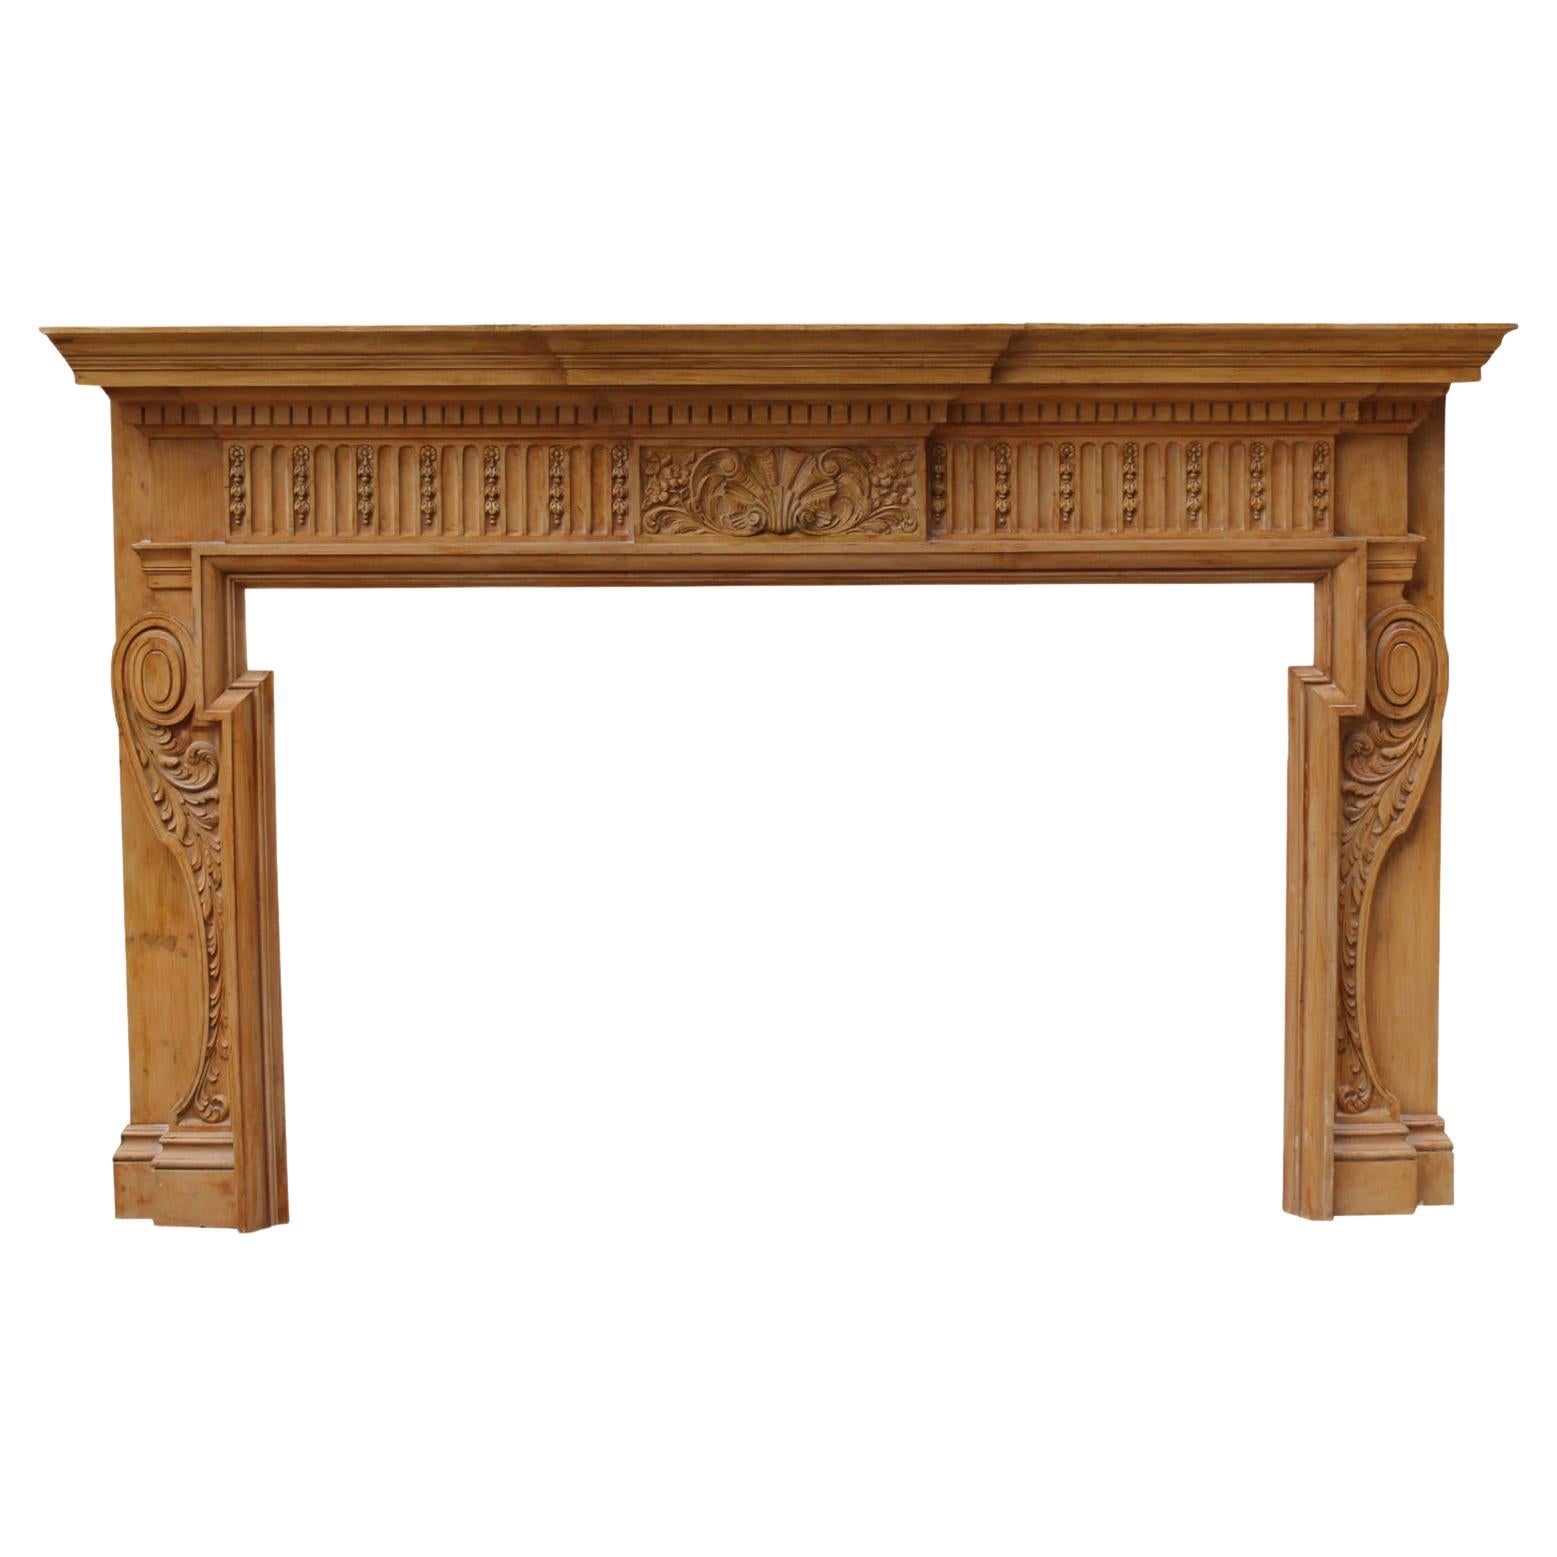 Antique Georgian Style Carved Pine Fire Surround For Sale